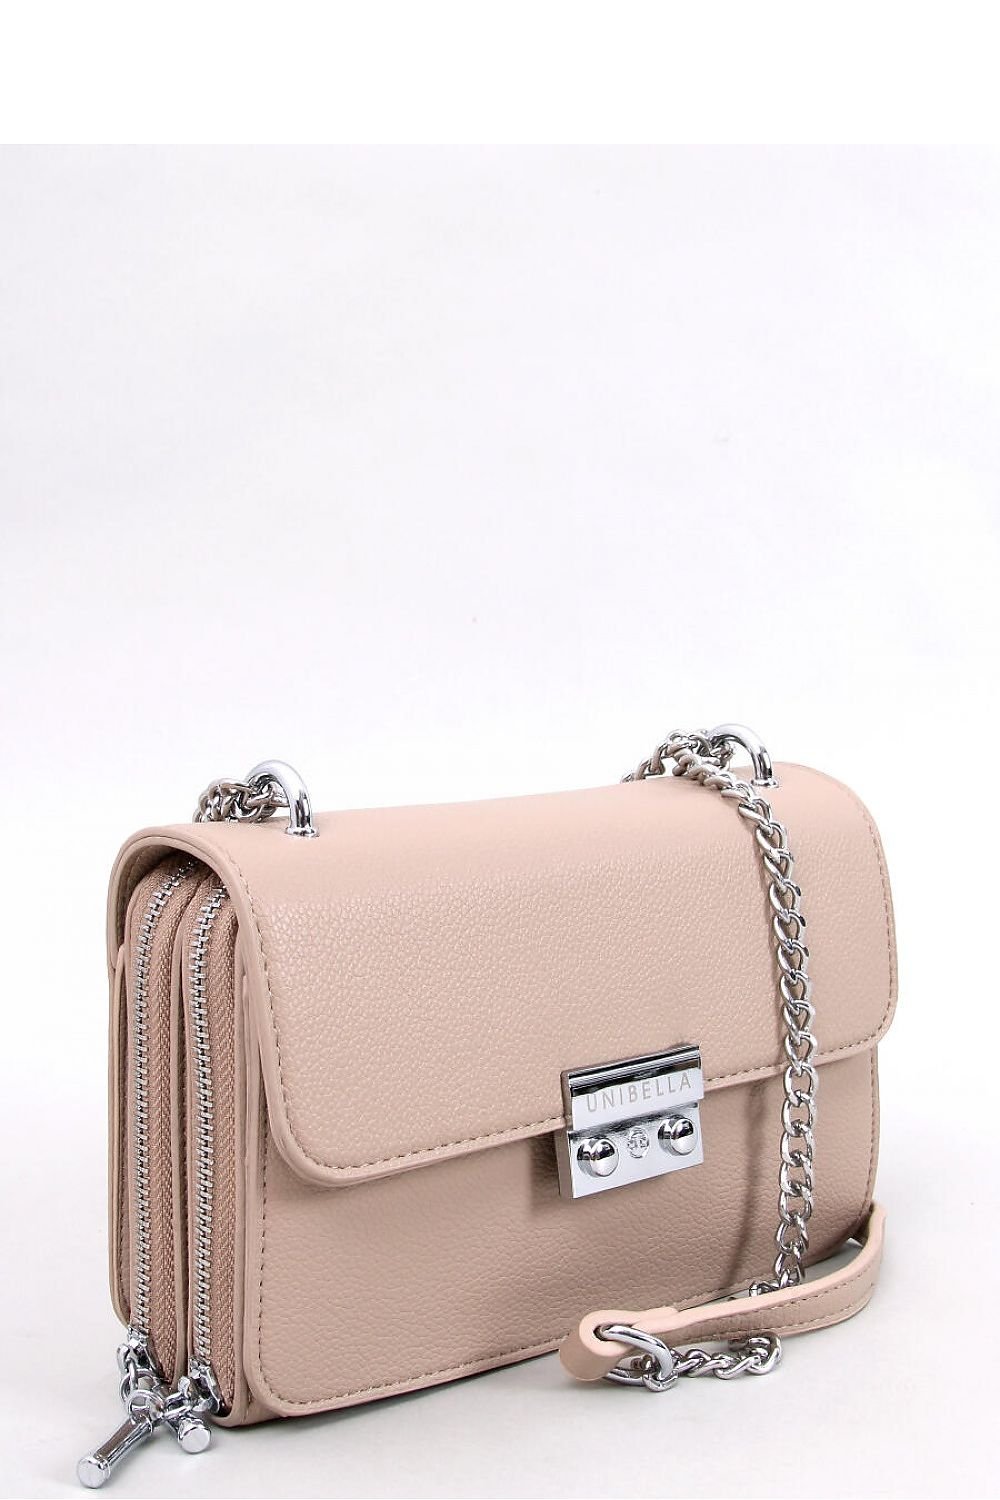 Beige messenger bag with a stylish snap closure